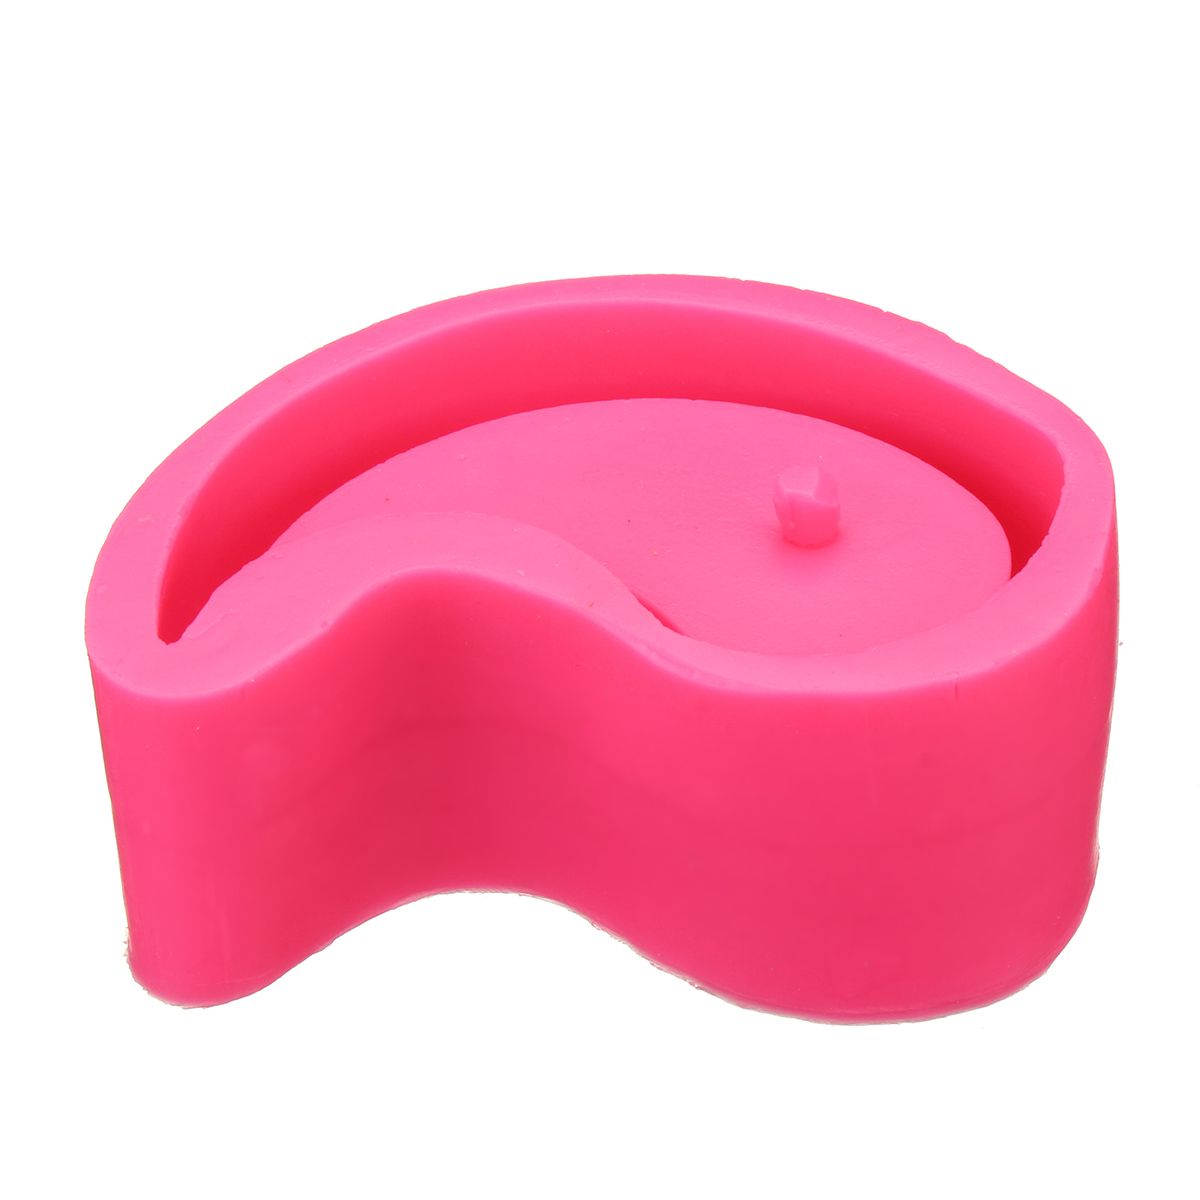 Silicone-Mold-Gossip-Shape-Concrete-Cement-Tabletop-Flowerpot-Chocolate-Mould-Crafts-1557222